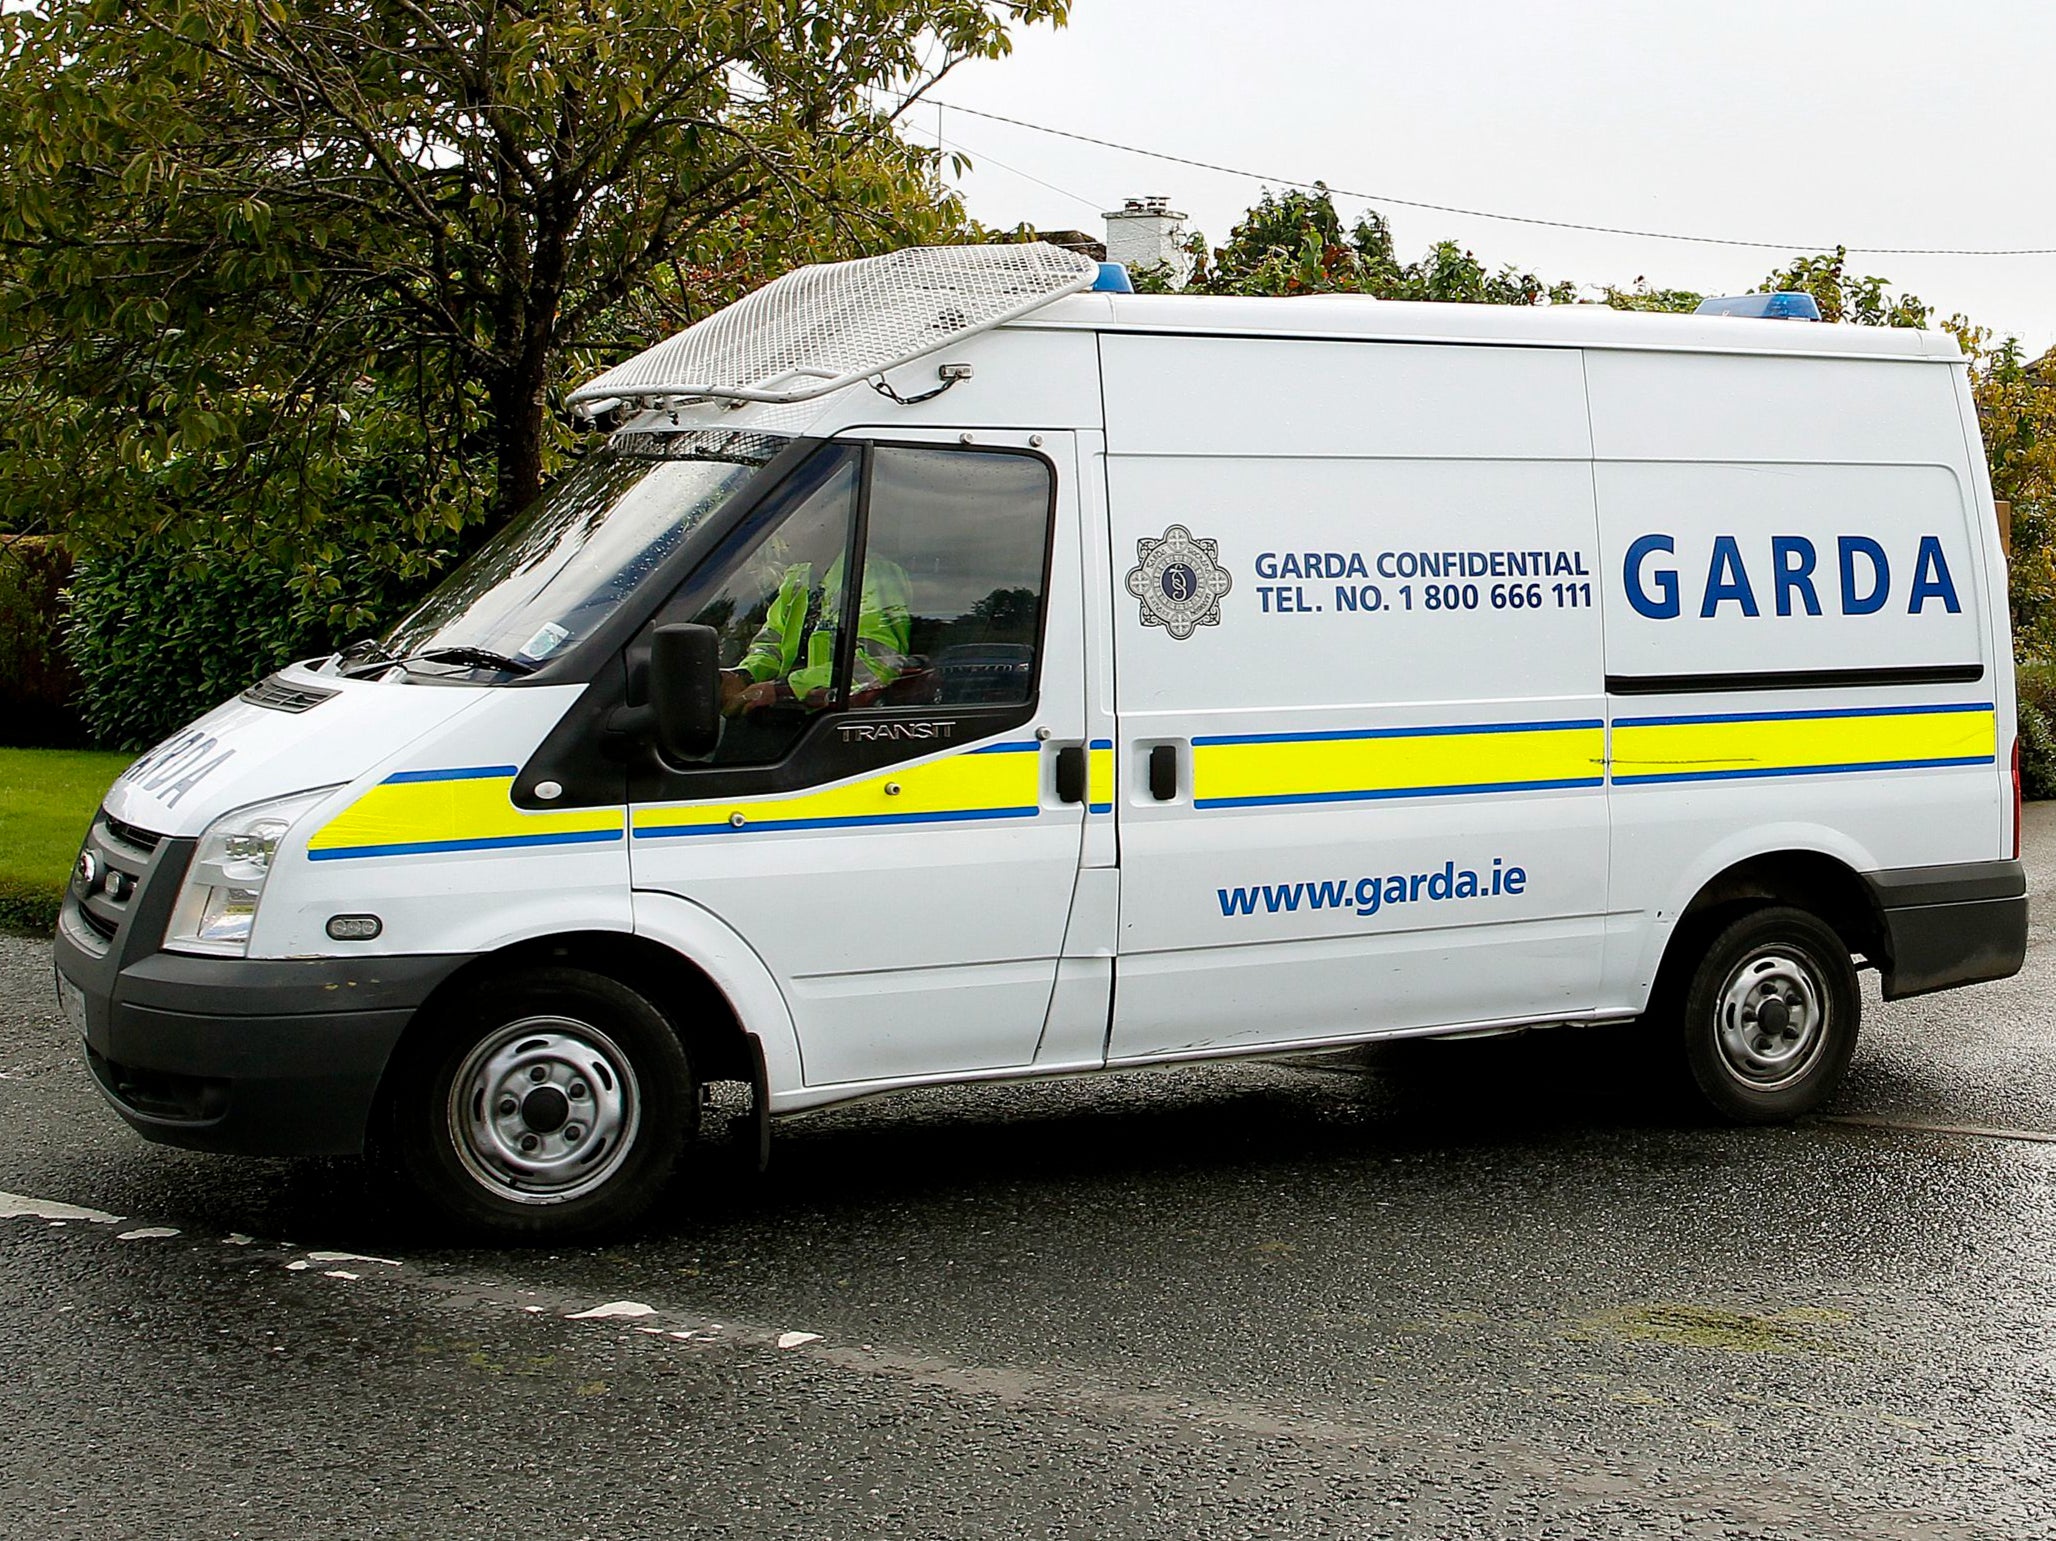 Gardaí and paramedics treated the infant at the scene